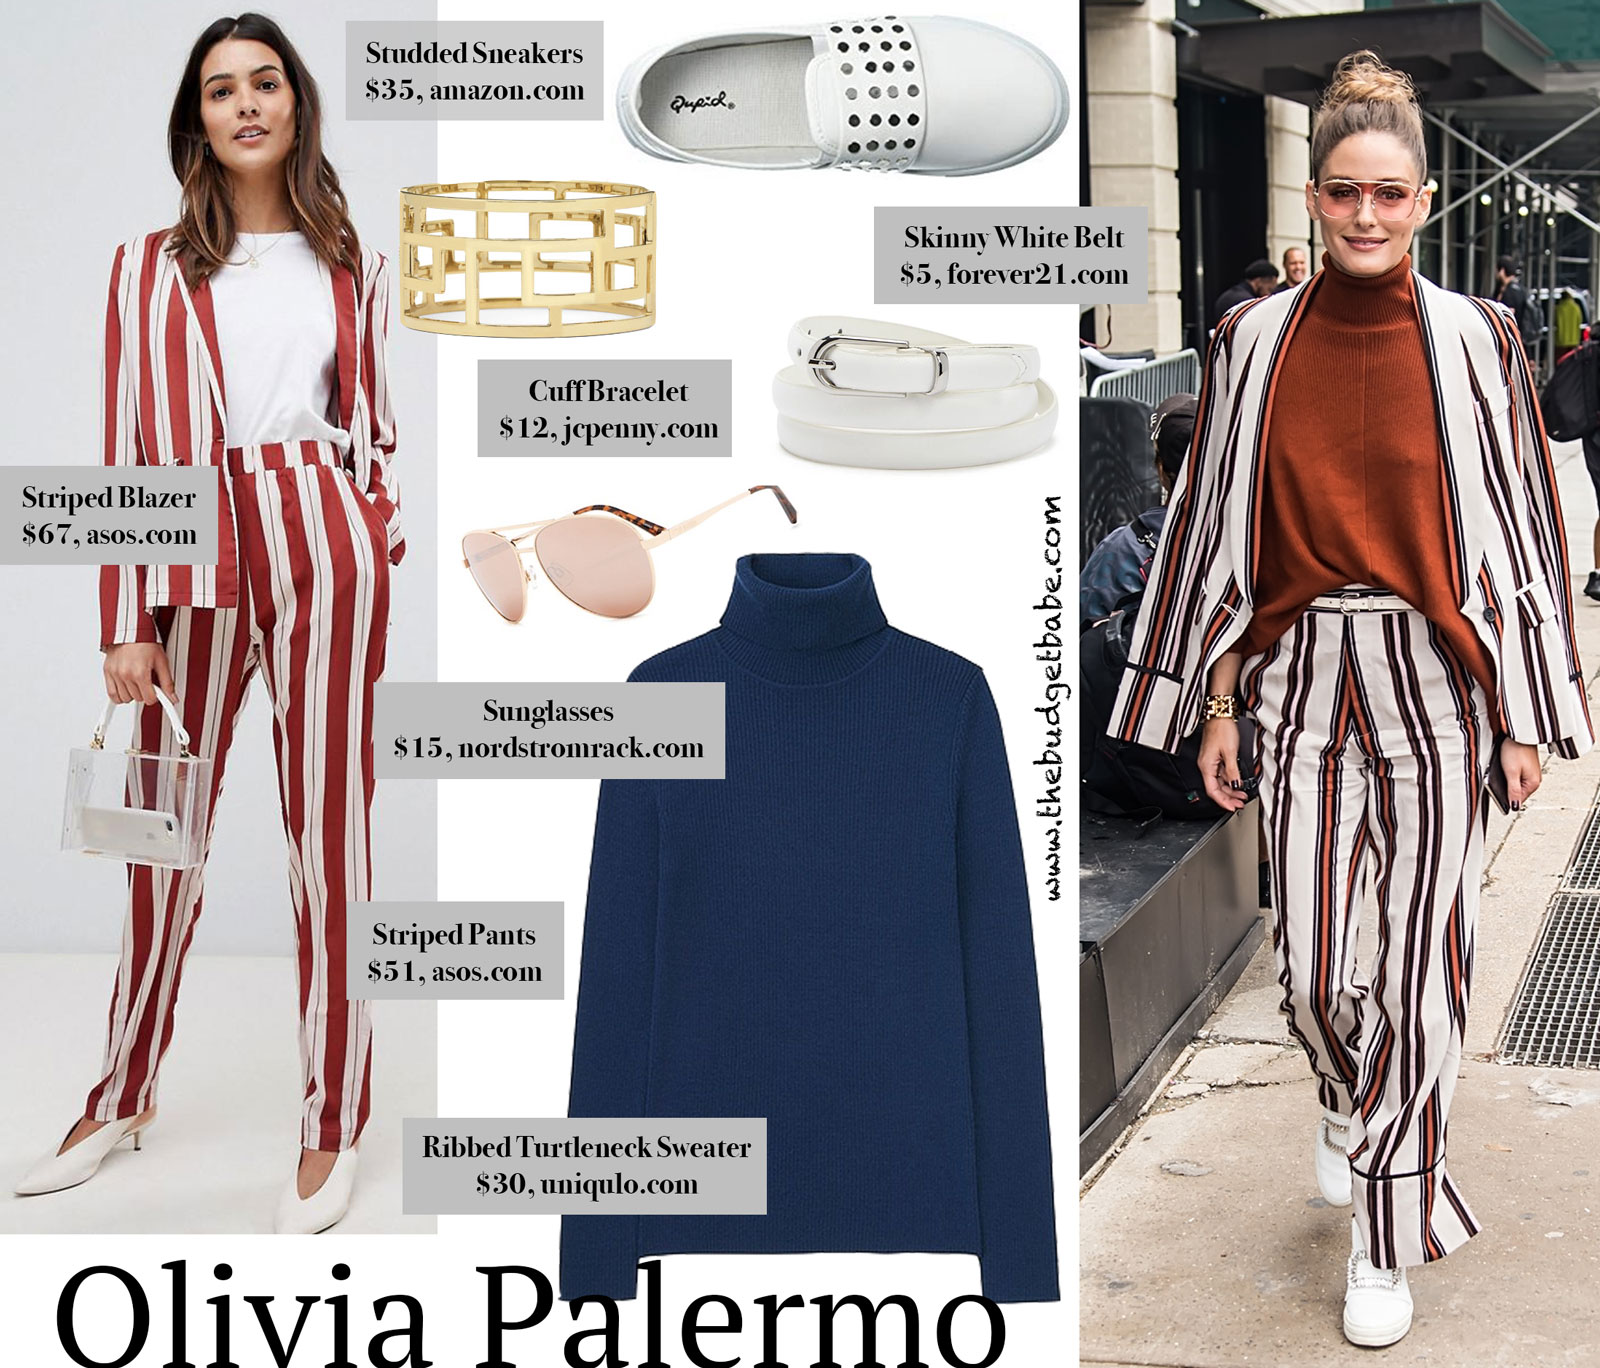 Olivia Palermo Striped Suit Look for Less